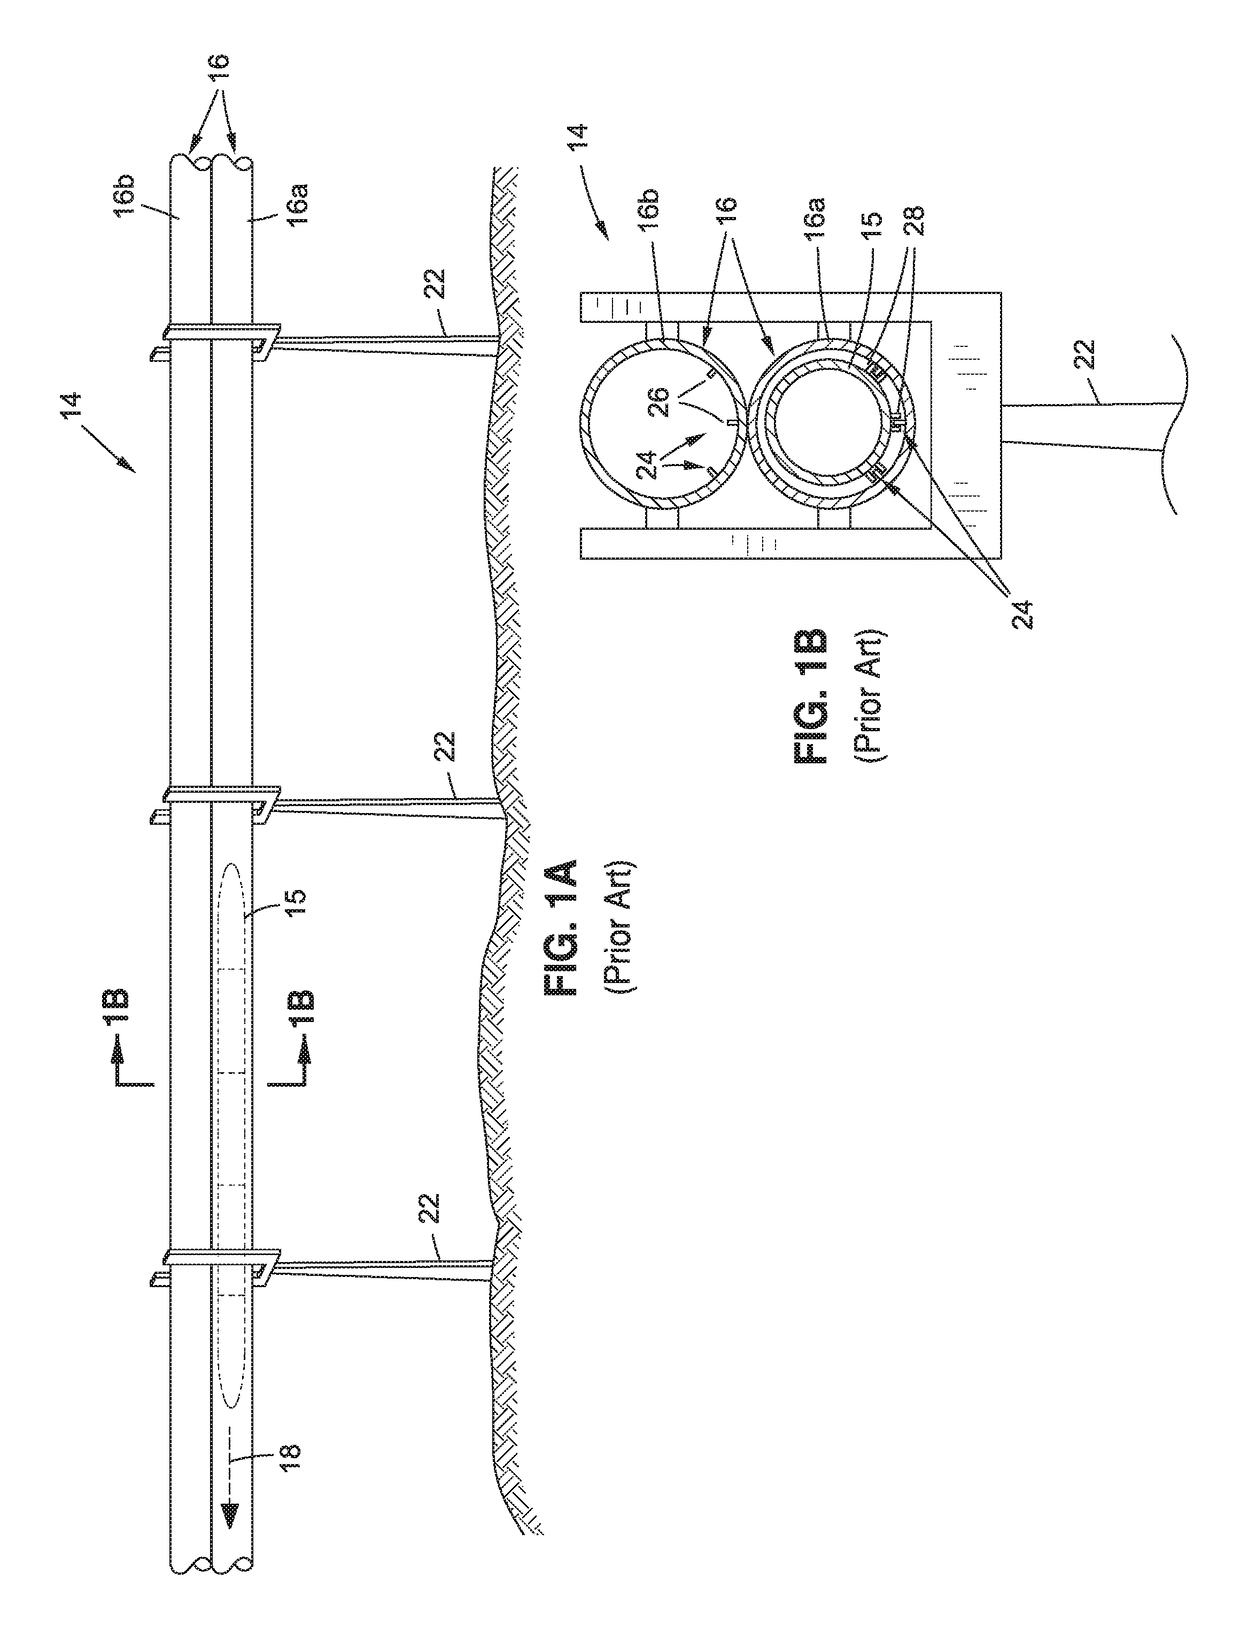 Vacuum transport tube vehicle, system, and method for evacuating a vacuum transport tube